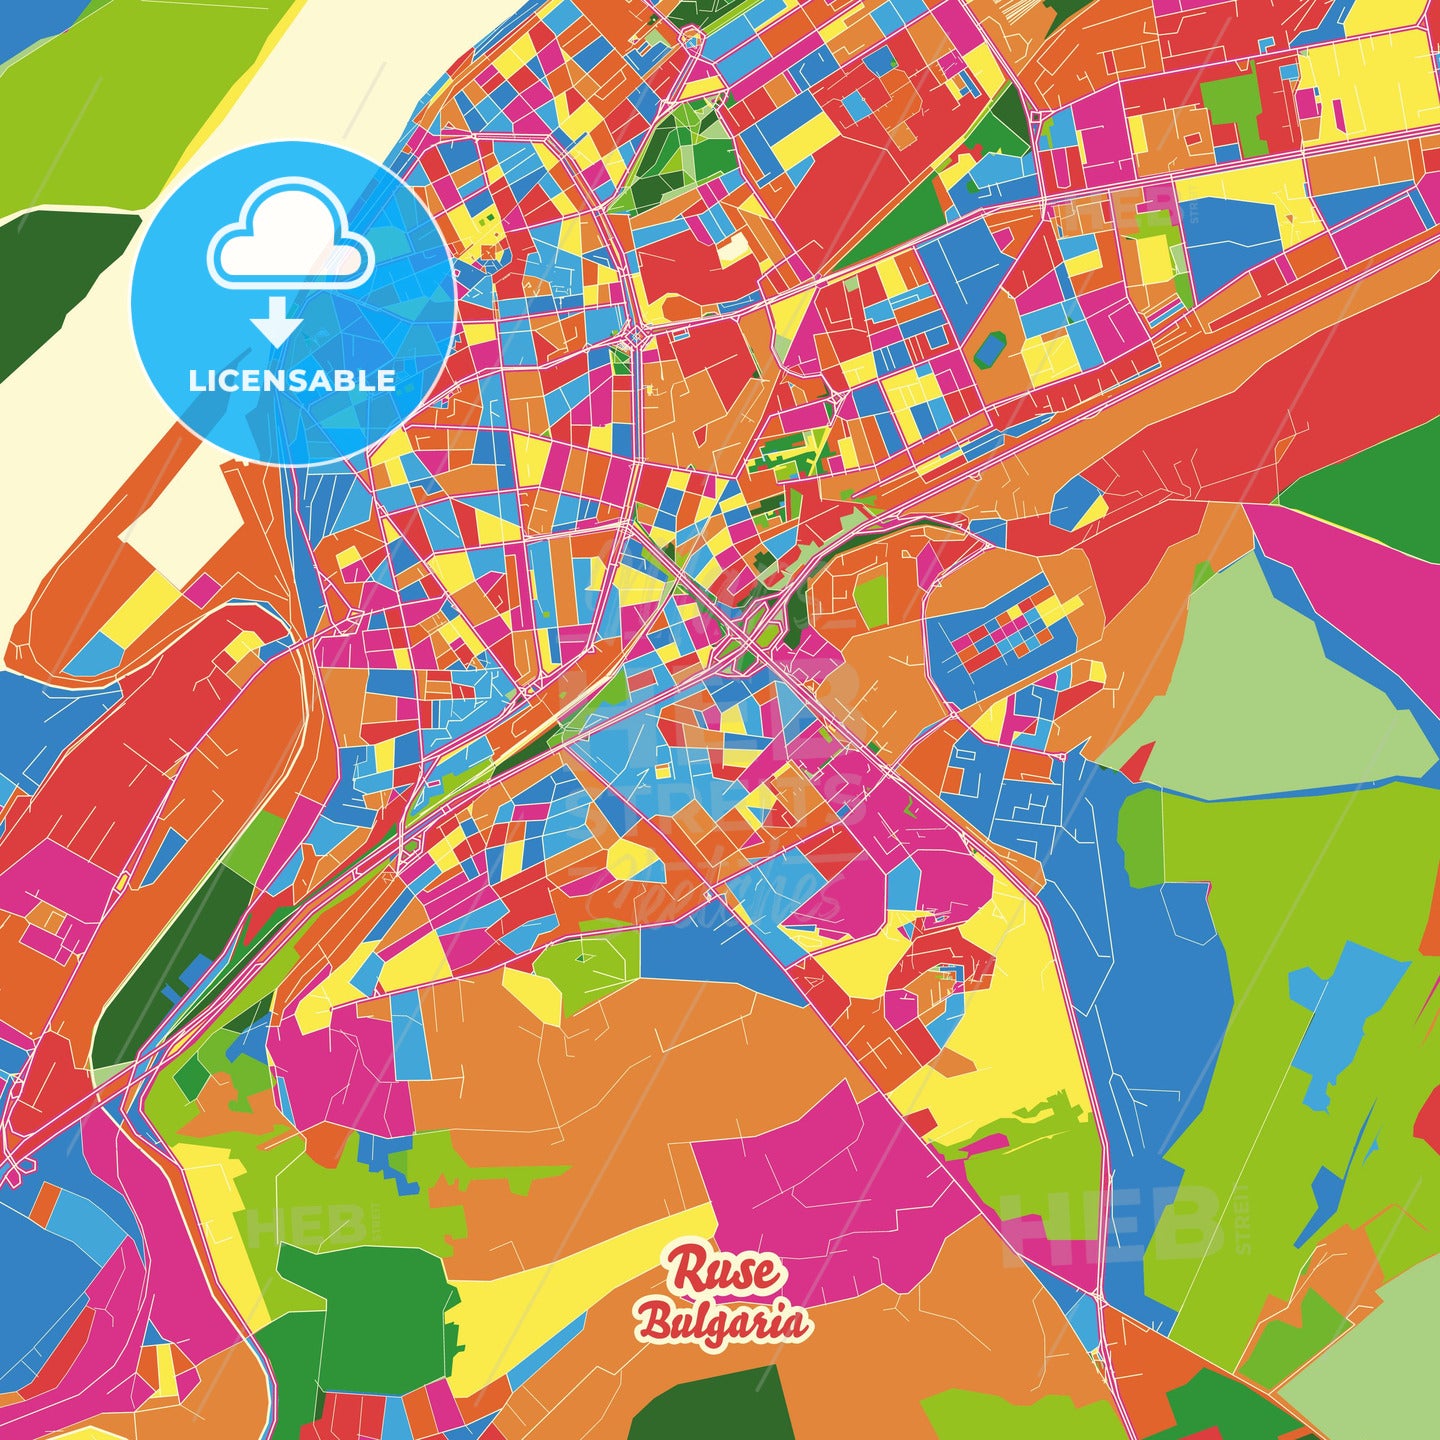 Ruse, Bulgaria Crazy Colorful Street Map Poster Template - HEBSTREITS Sketches